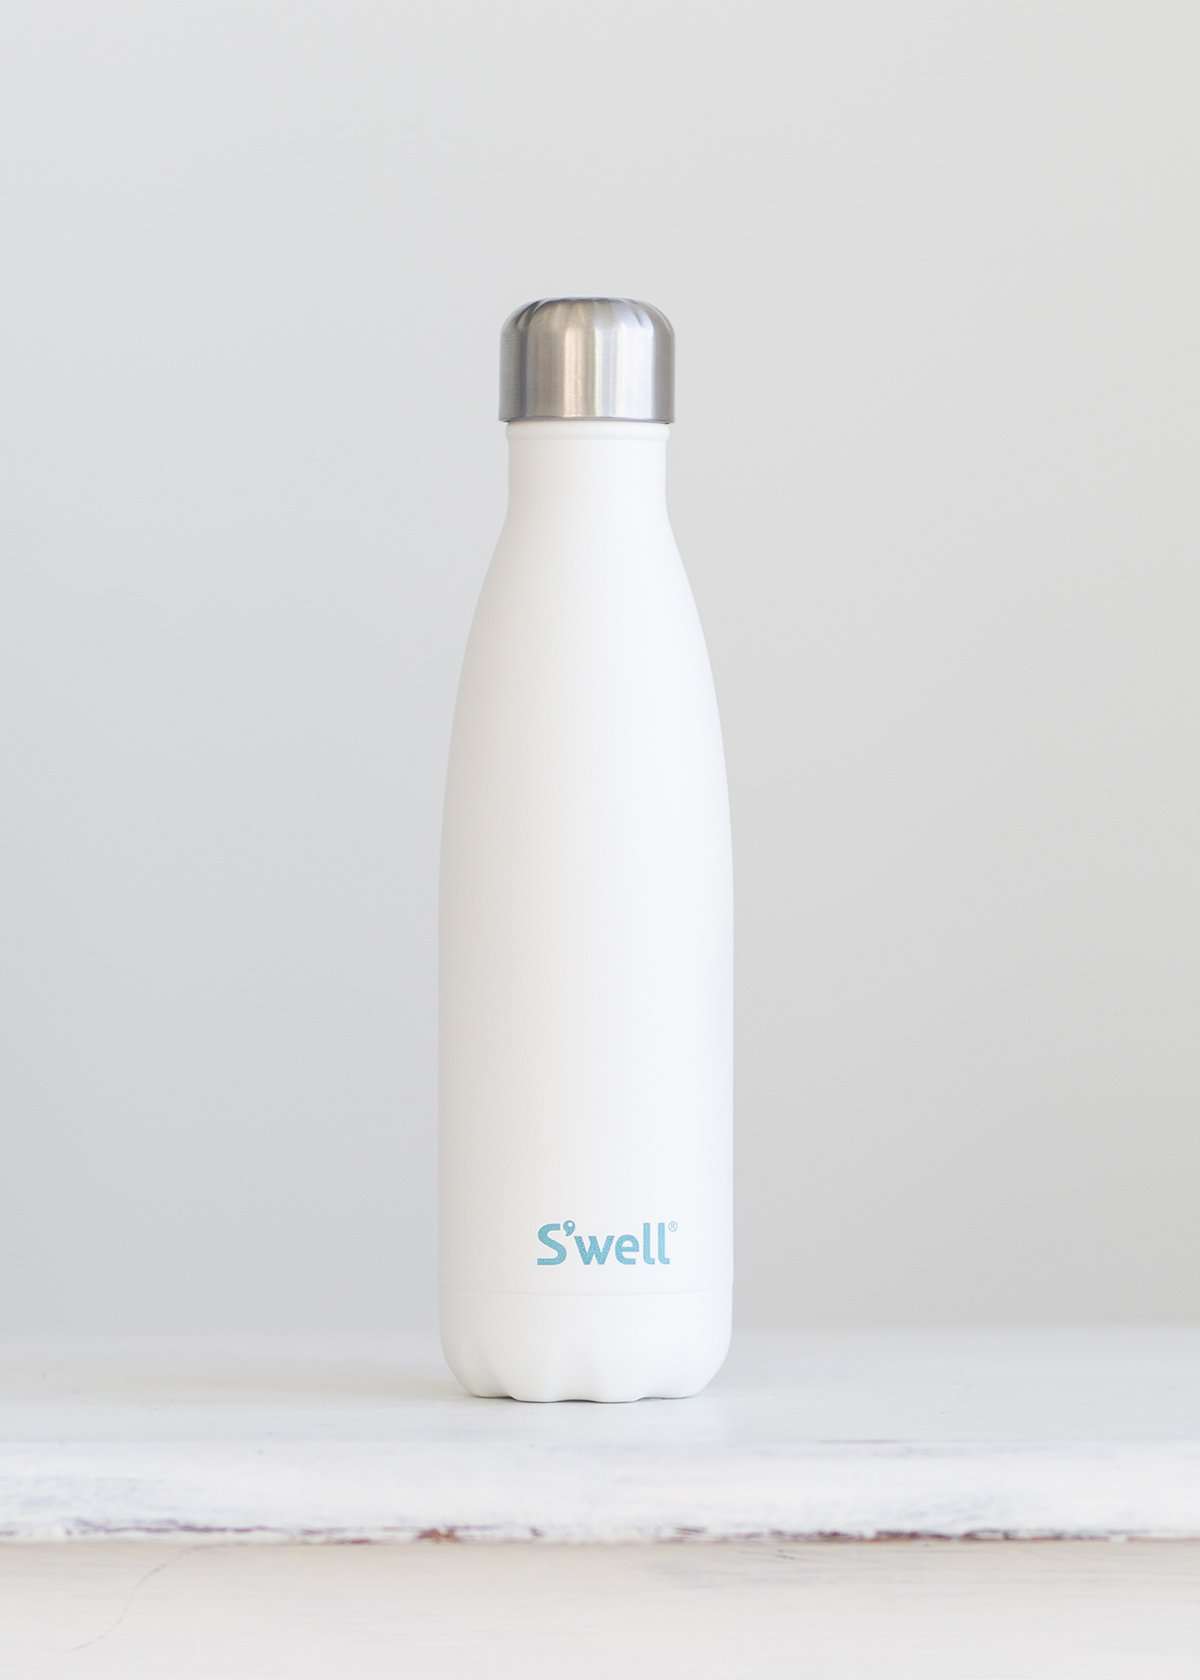 S'well water bottle in a white design and holds 17 oz.